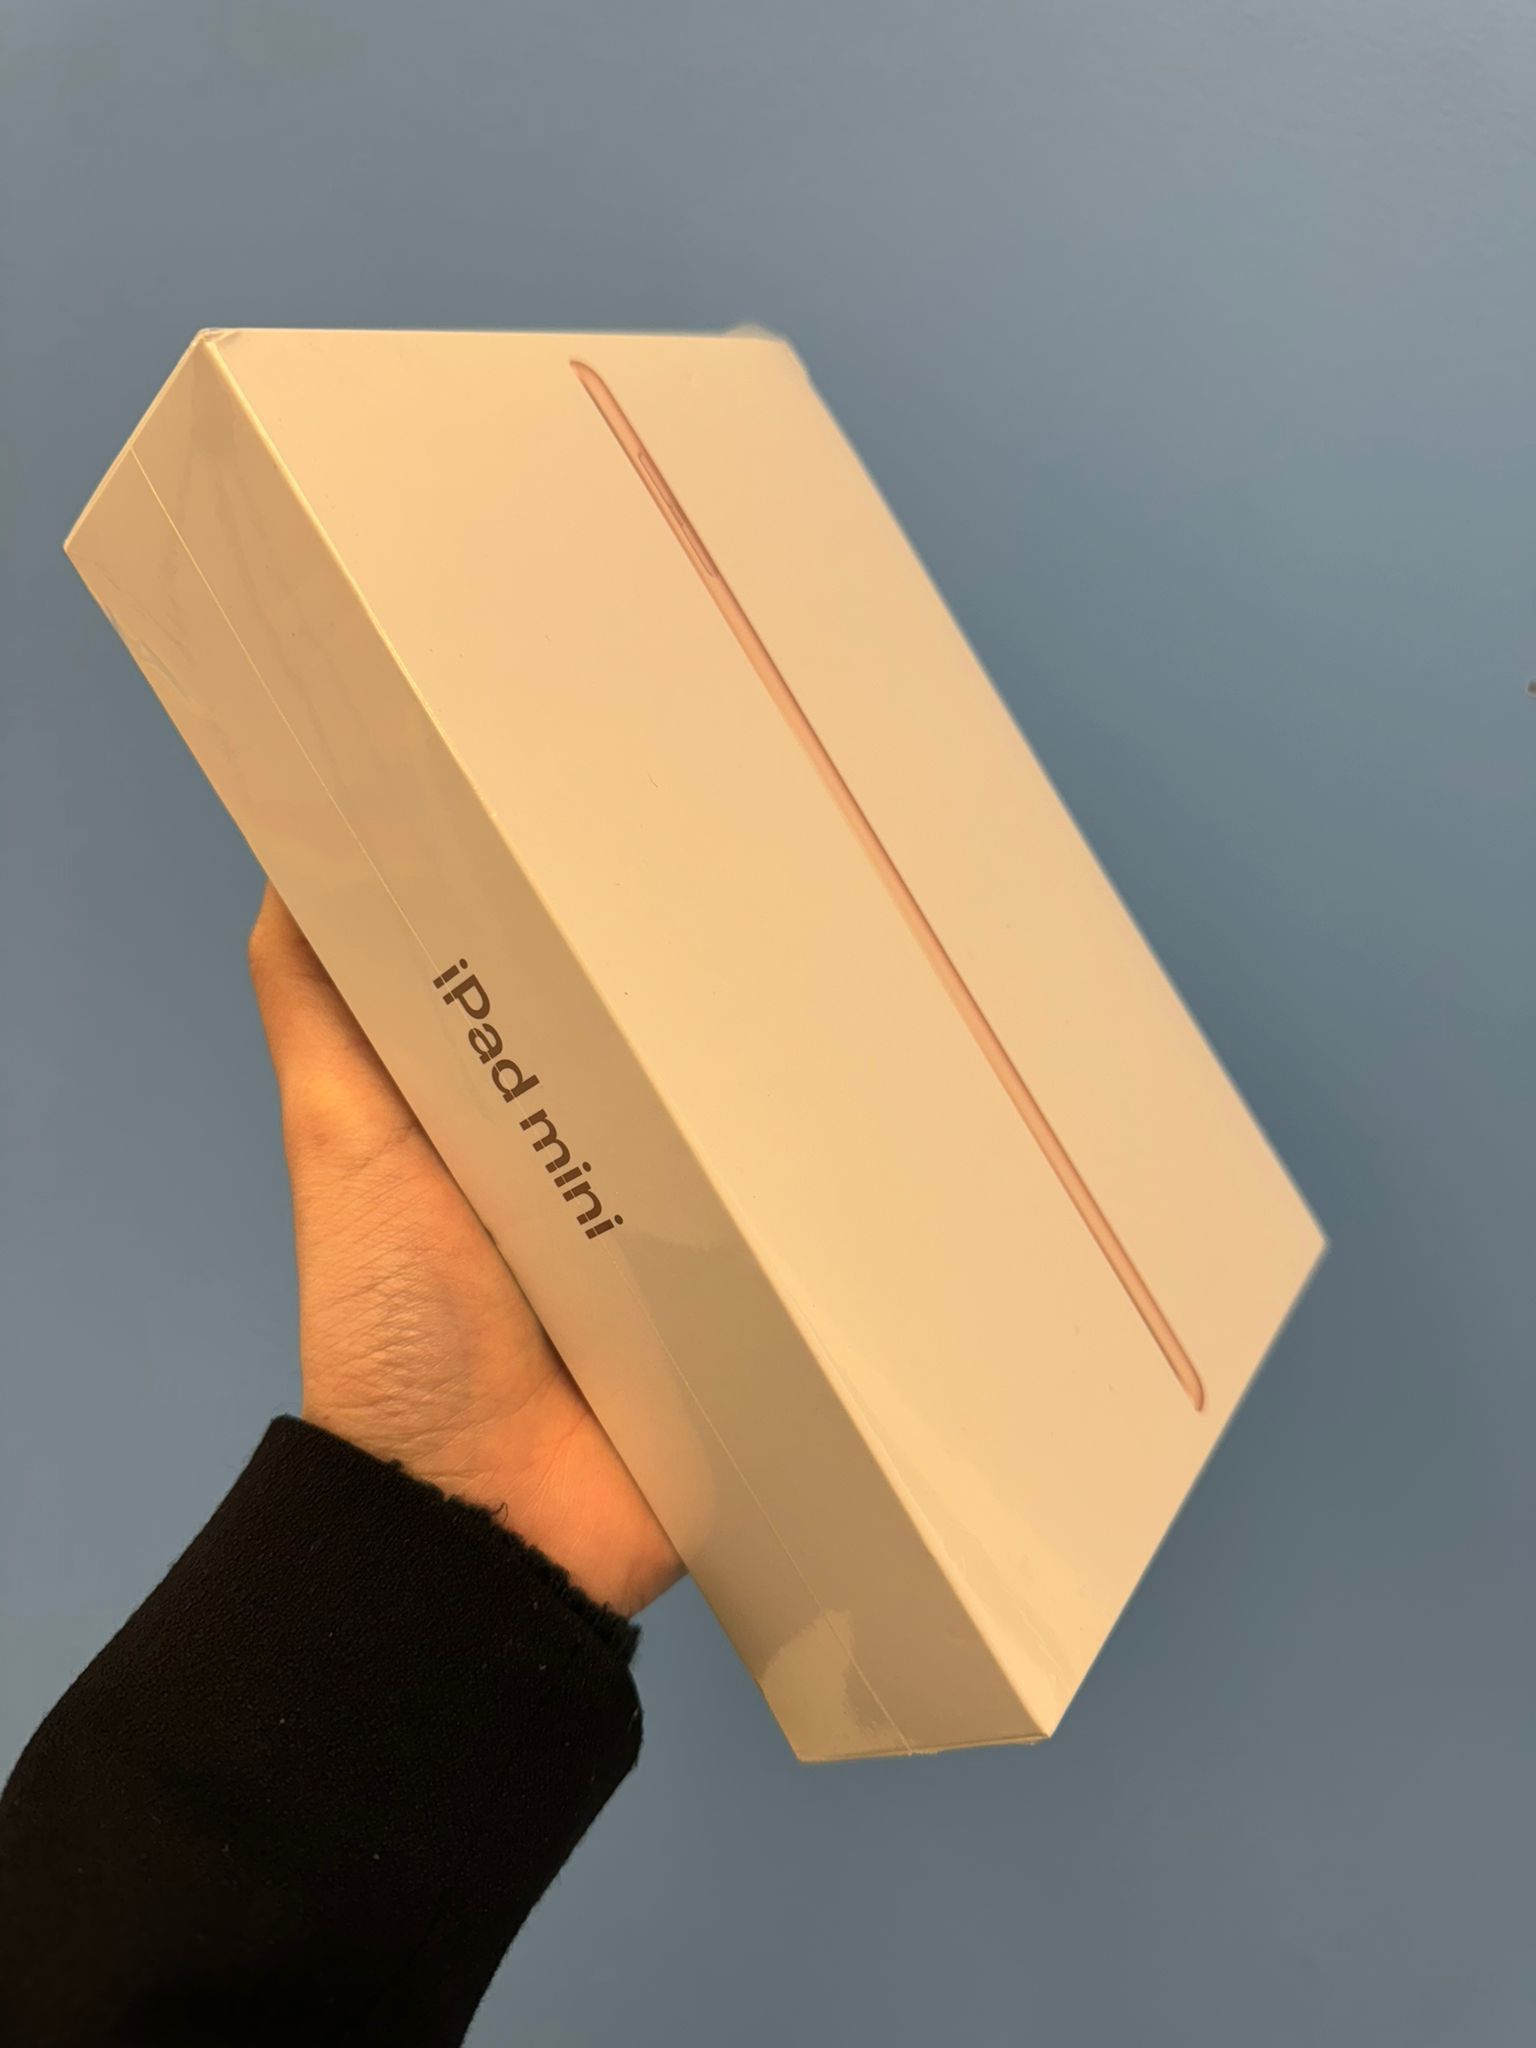 New Apple iPad Mini 5 Generation - Pay $1 Today to Take it Home and Pay the Rest Later!